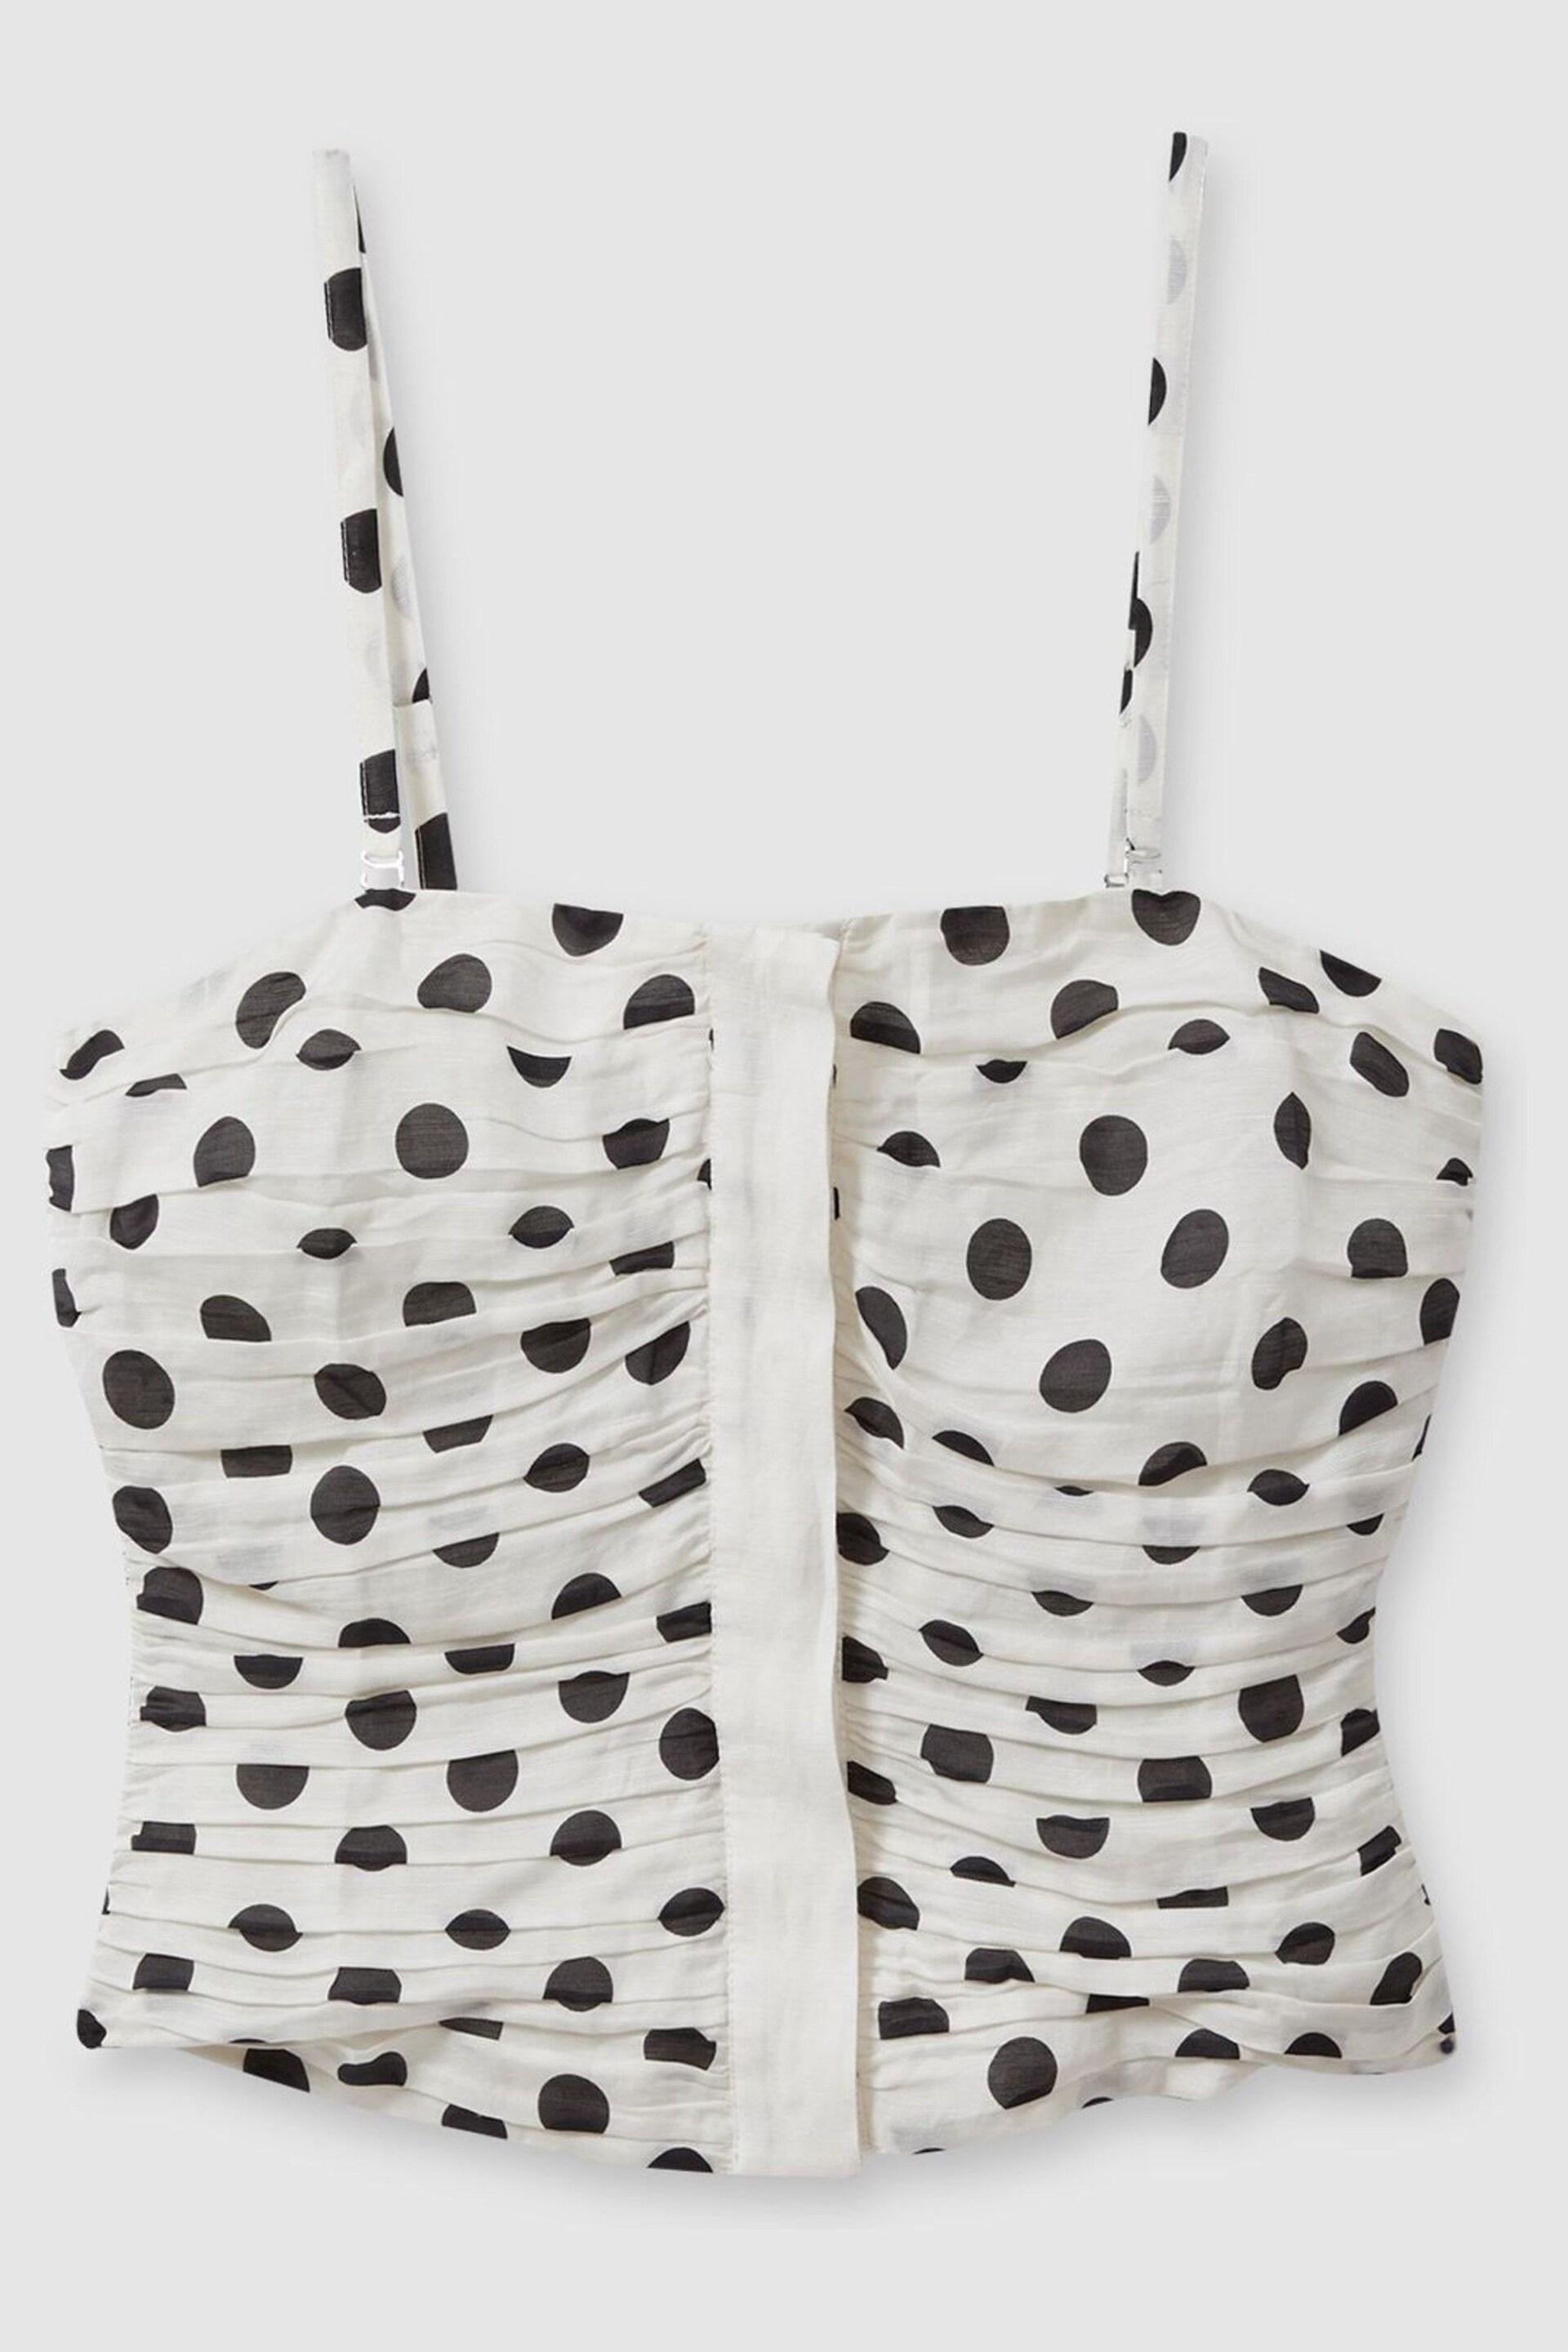 Reiss White/Black Remie Viscose Linen Polka Dot Ruched Strapless Top - Image 2 of 6